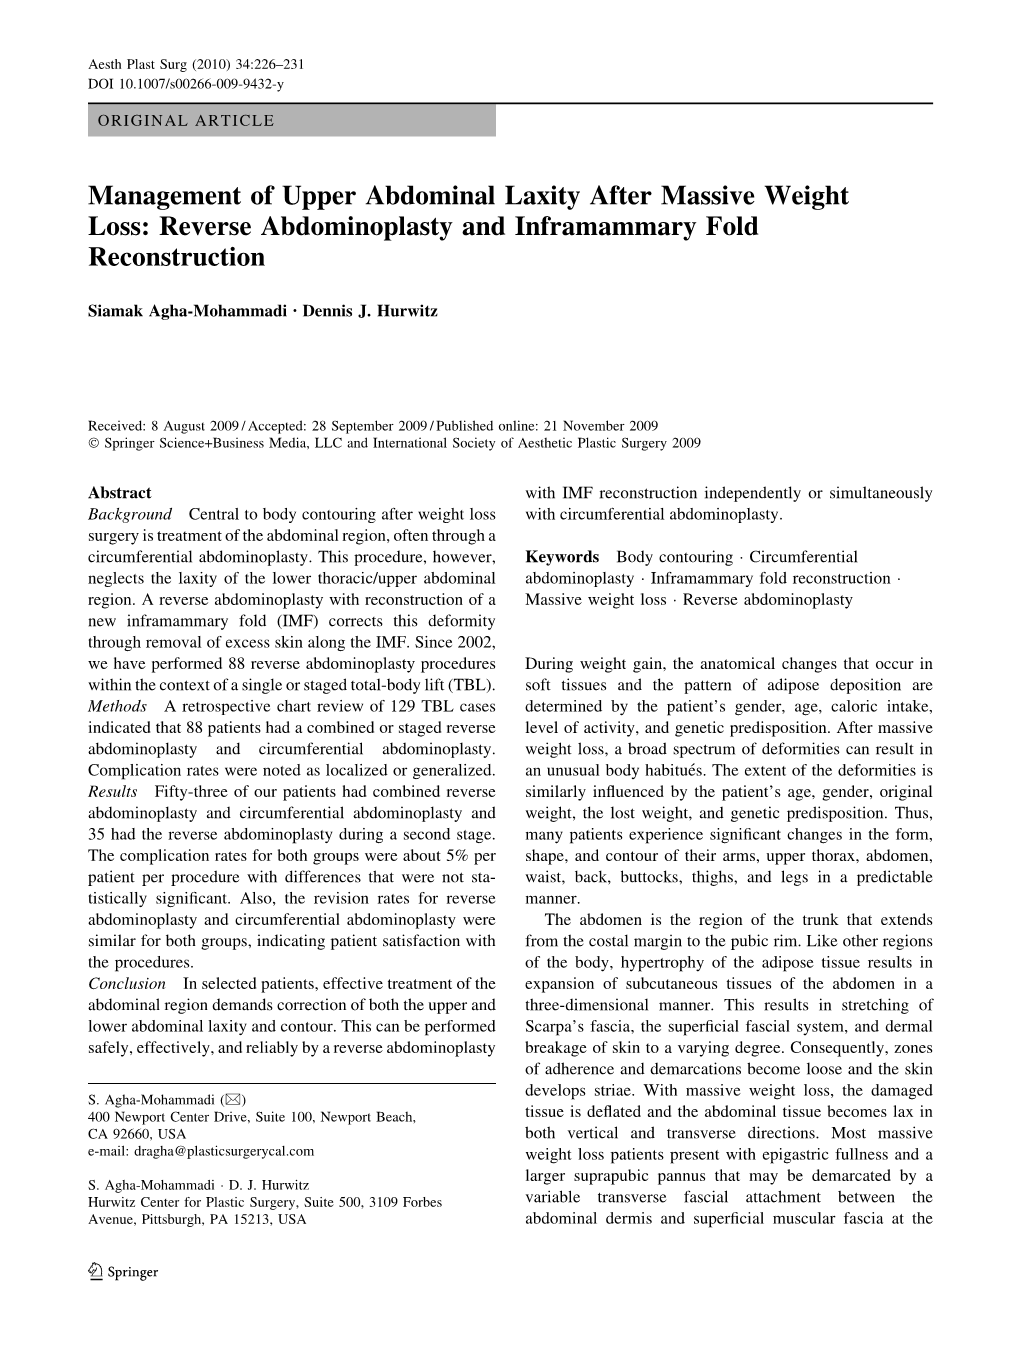 Management of Upper Abdominal Laxity After Massive Weight Loss: Reverse Abdominoplasty and Inframammary Fold Reconstruction